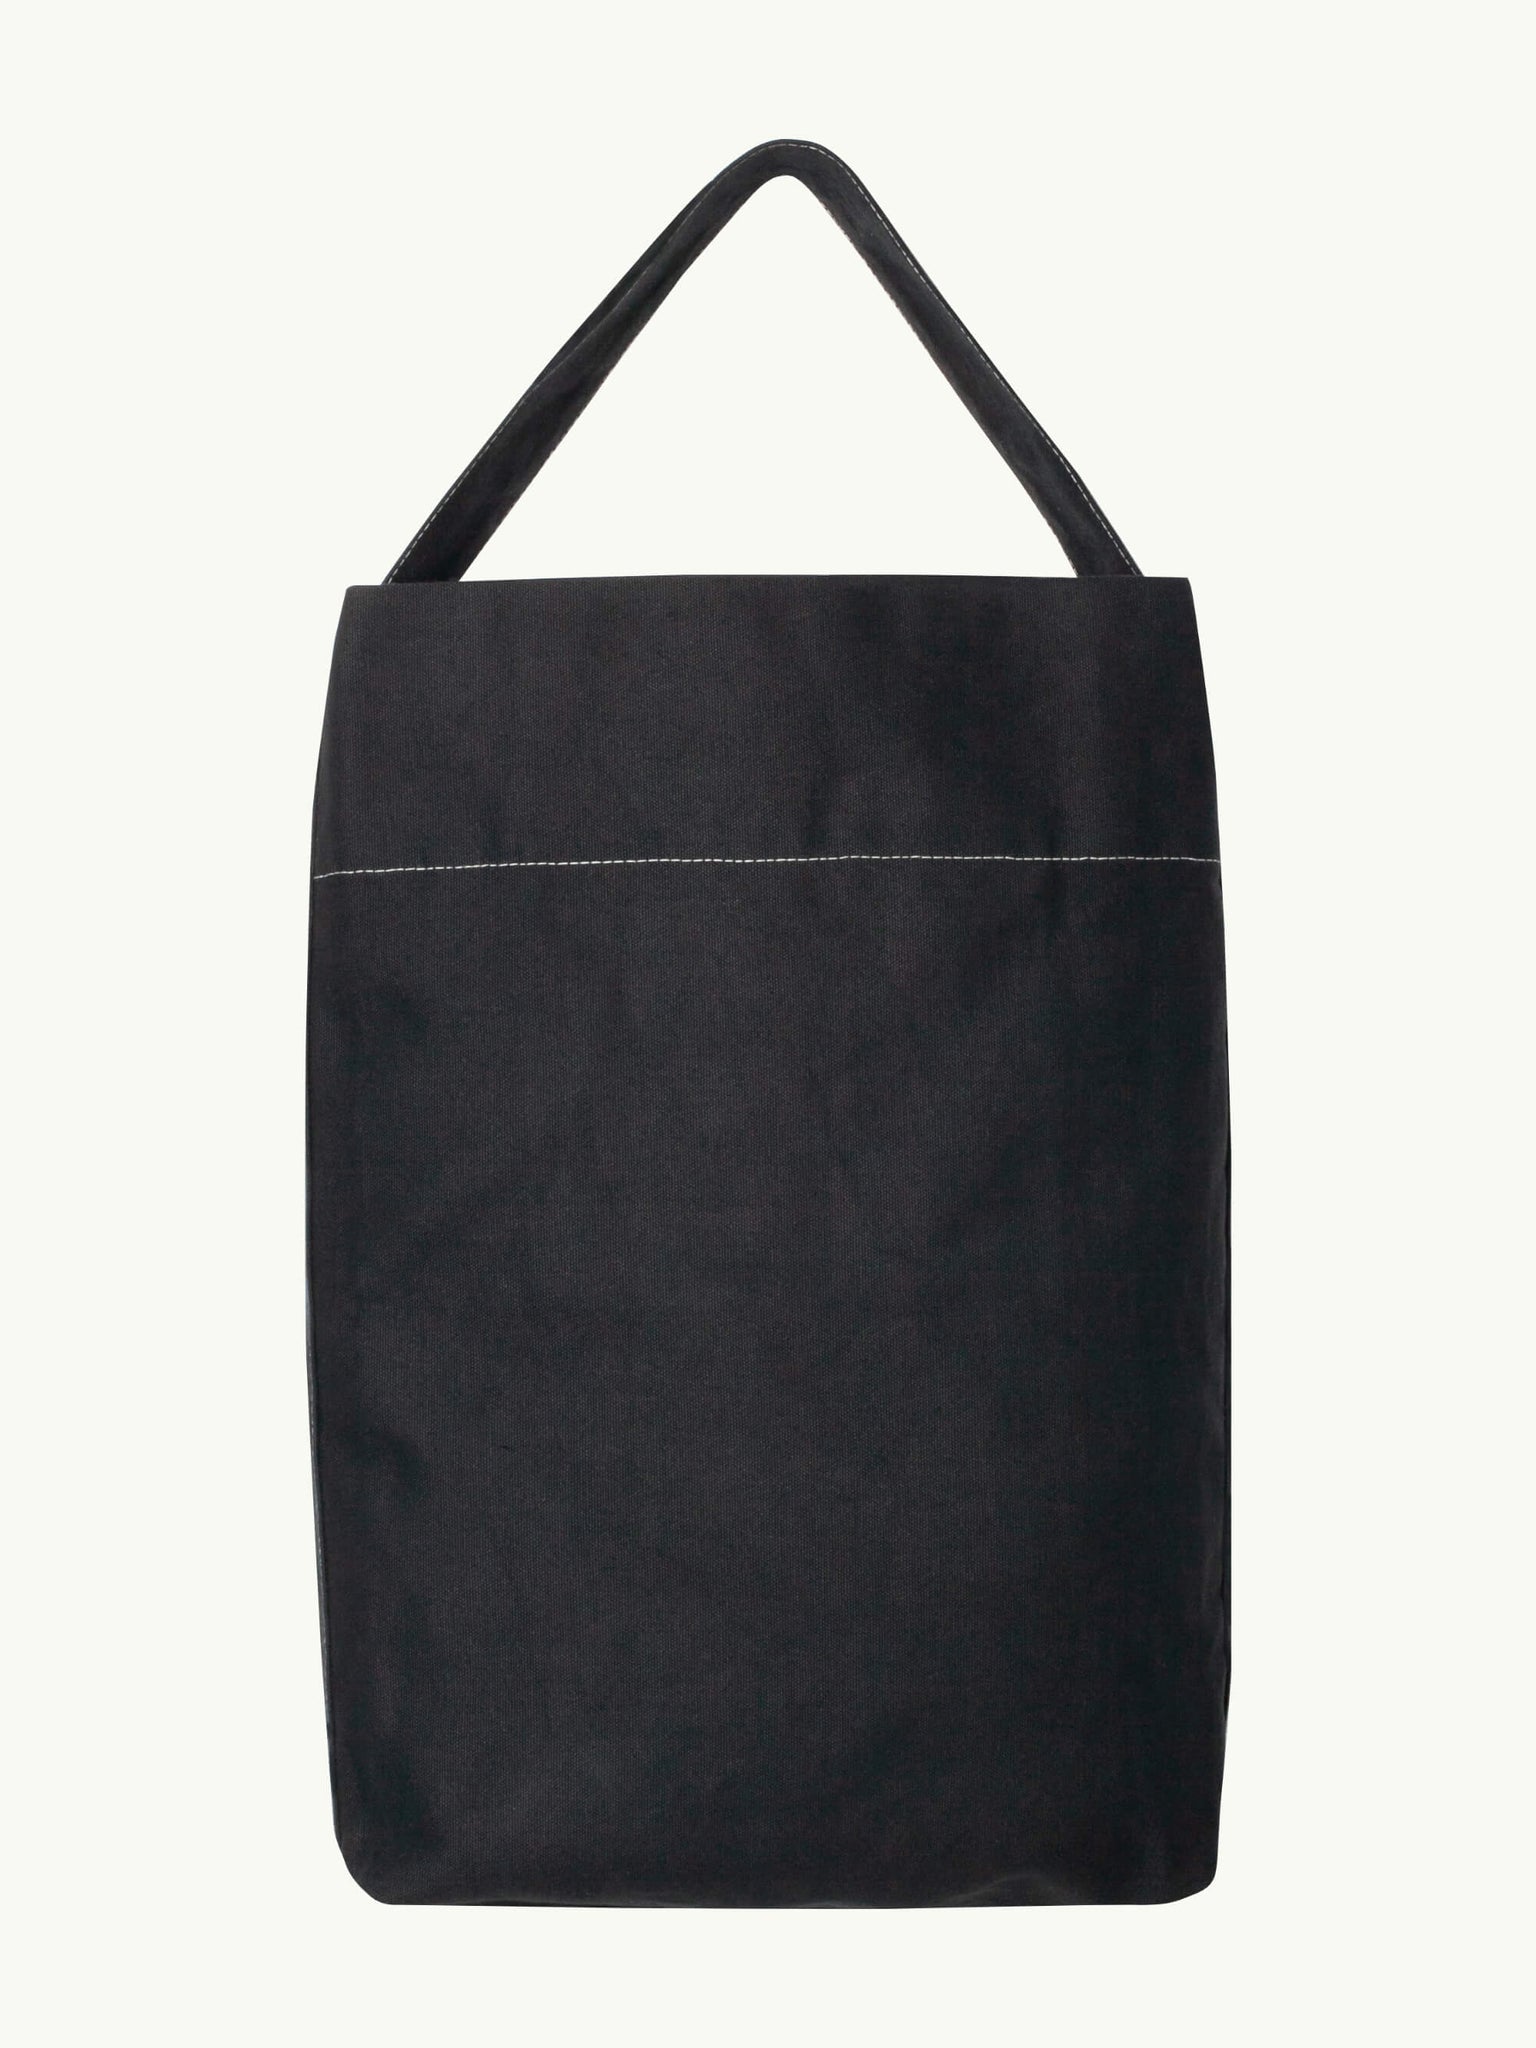 Bucket Tote in Black with Contrast Stitching